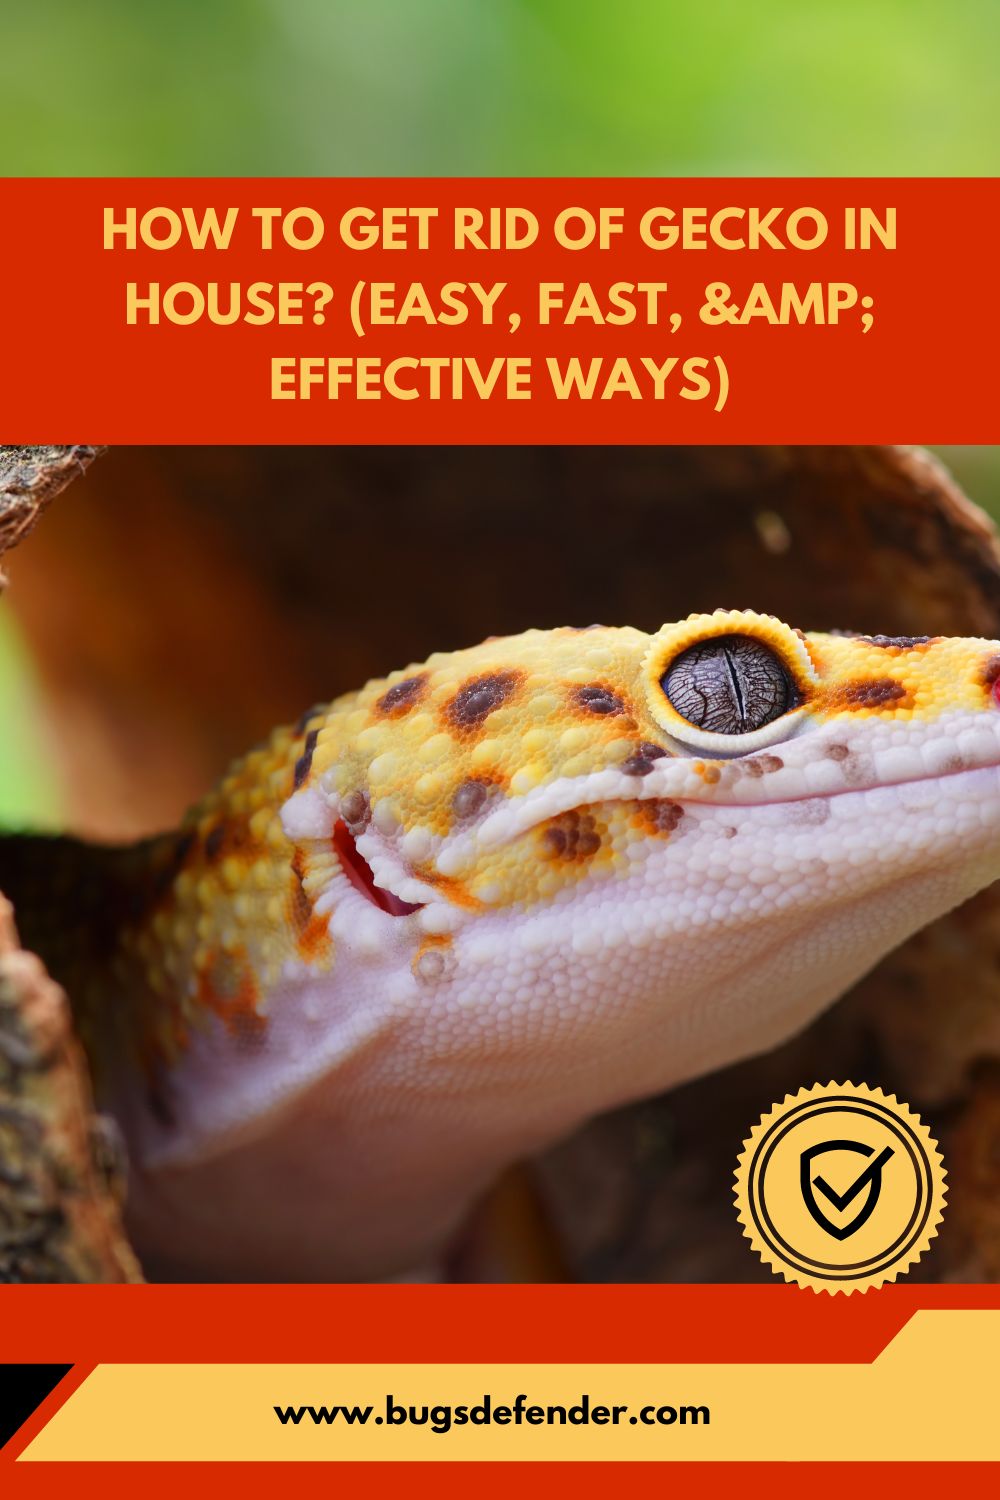 How to Get Rid of Gecko in House (Easy, Fast, & Effective Ways) pin2